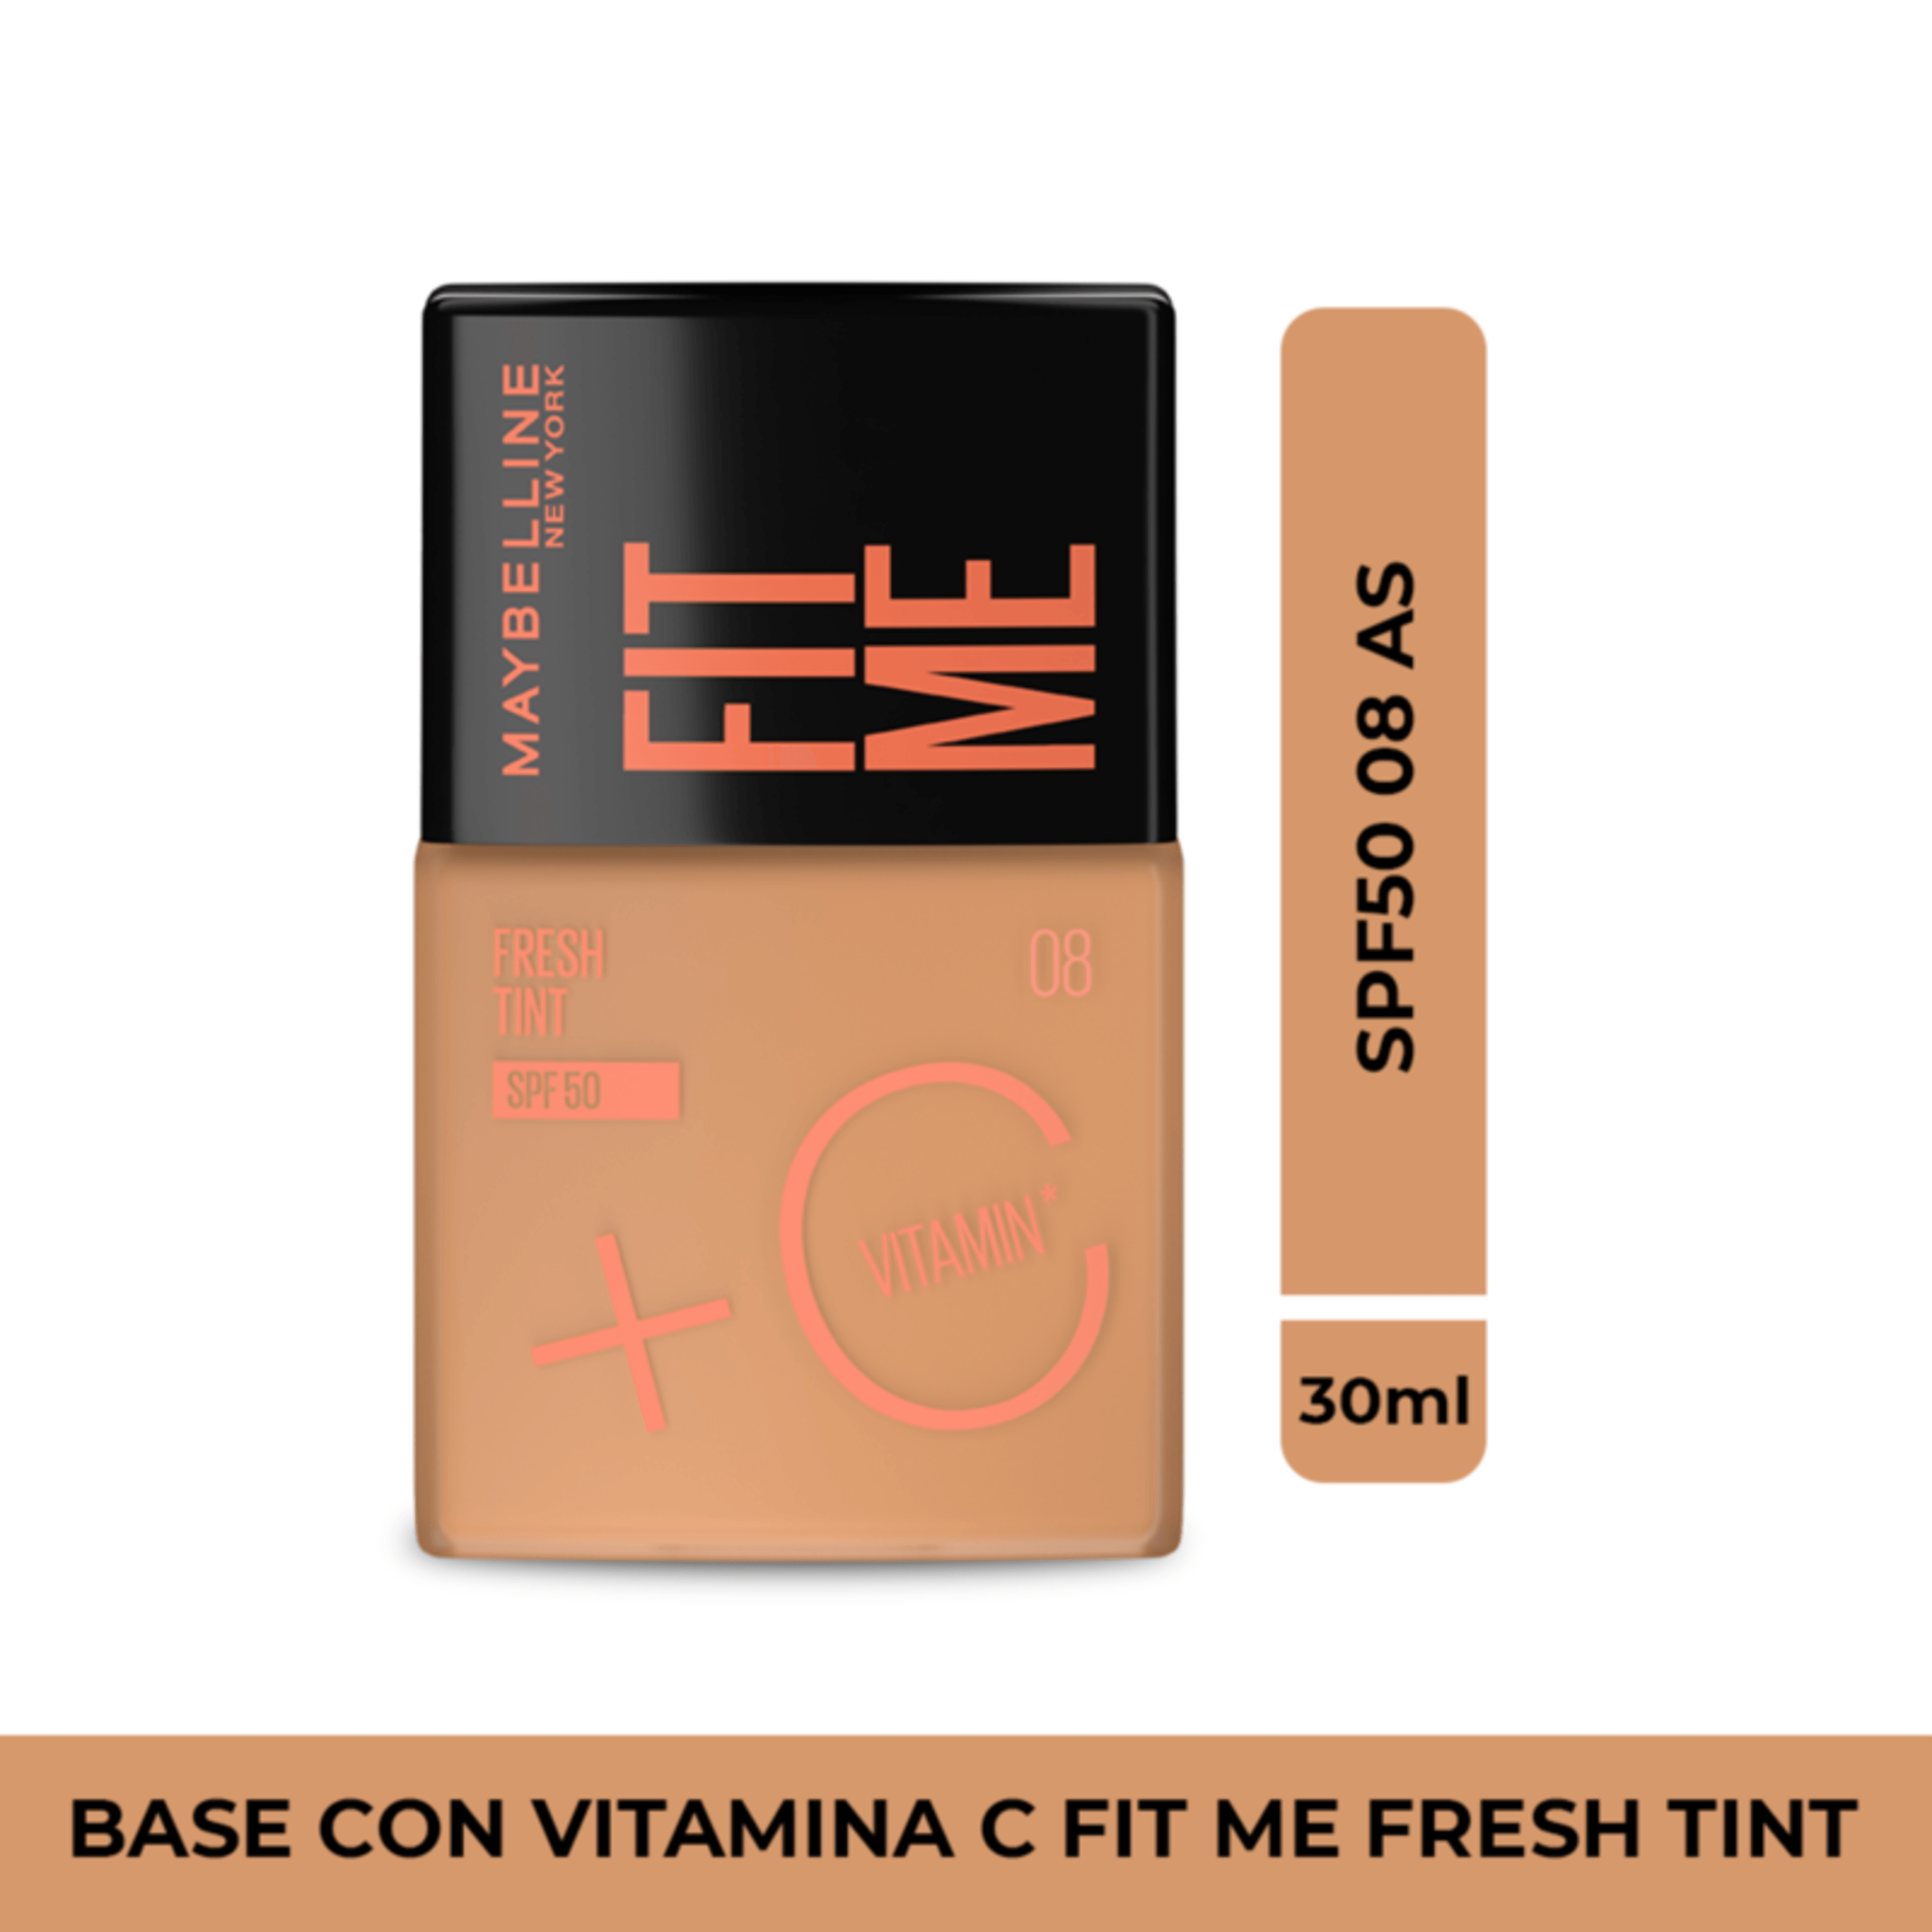 Comprar Base De Maquillaje Maybelline Ny Fit Me Fresh Tint Spf50 08 30ml